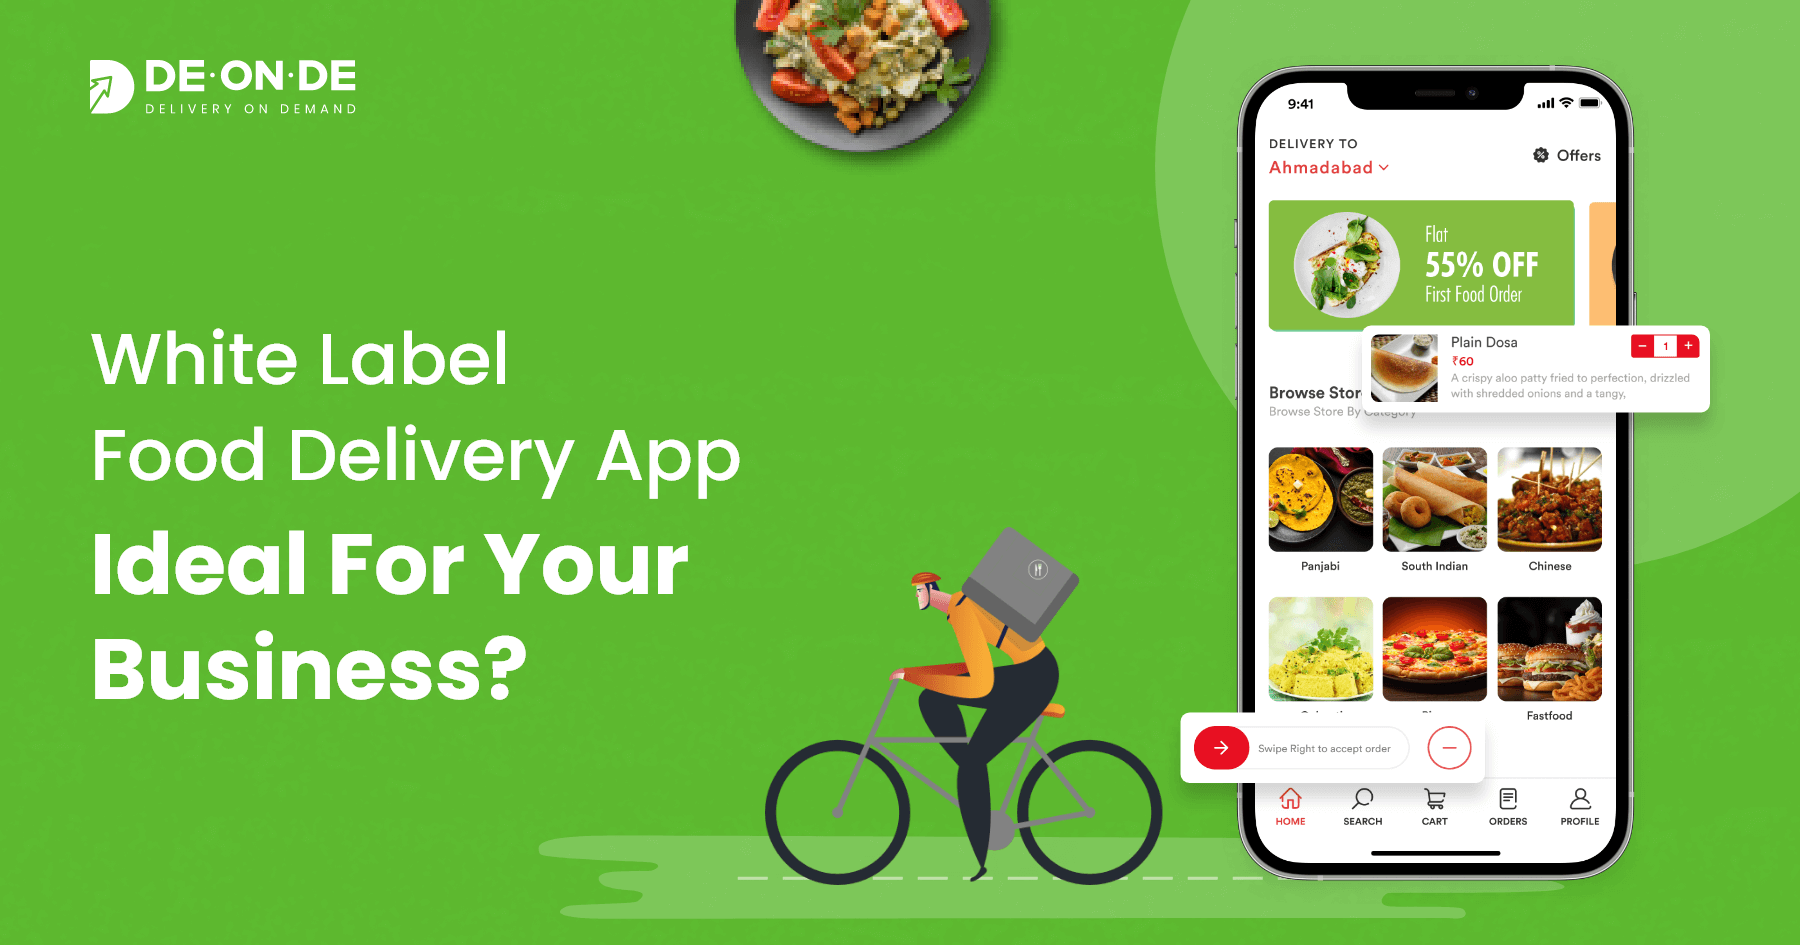 White Label Food Delivery App